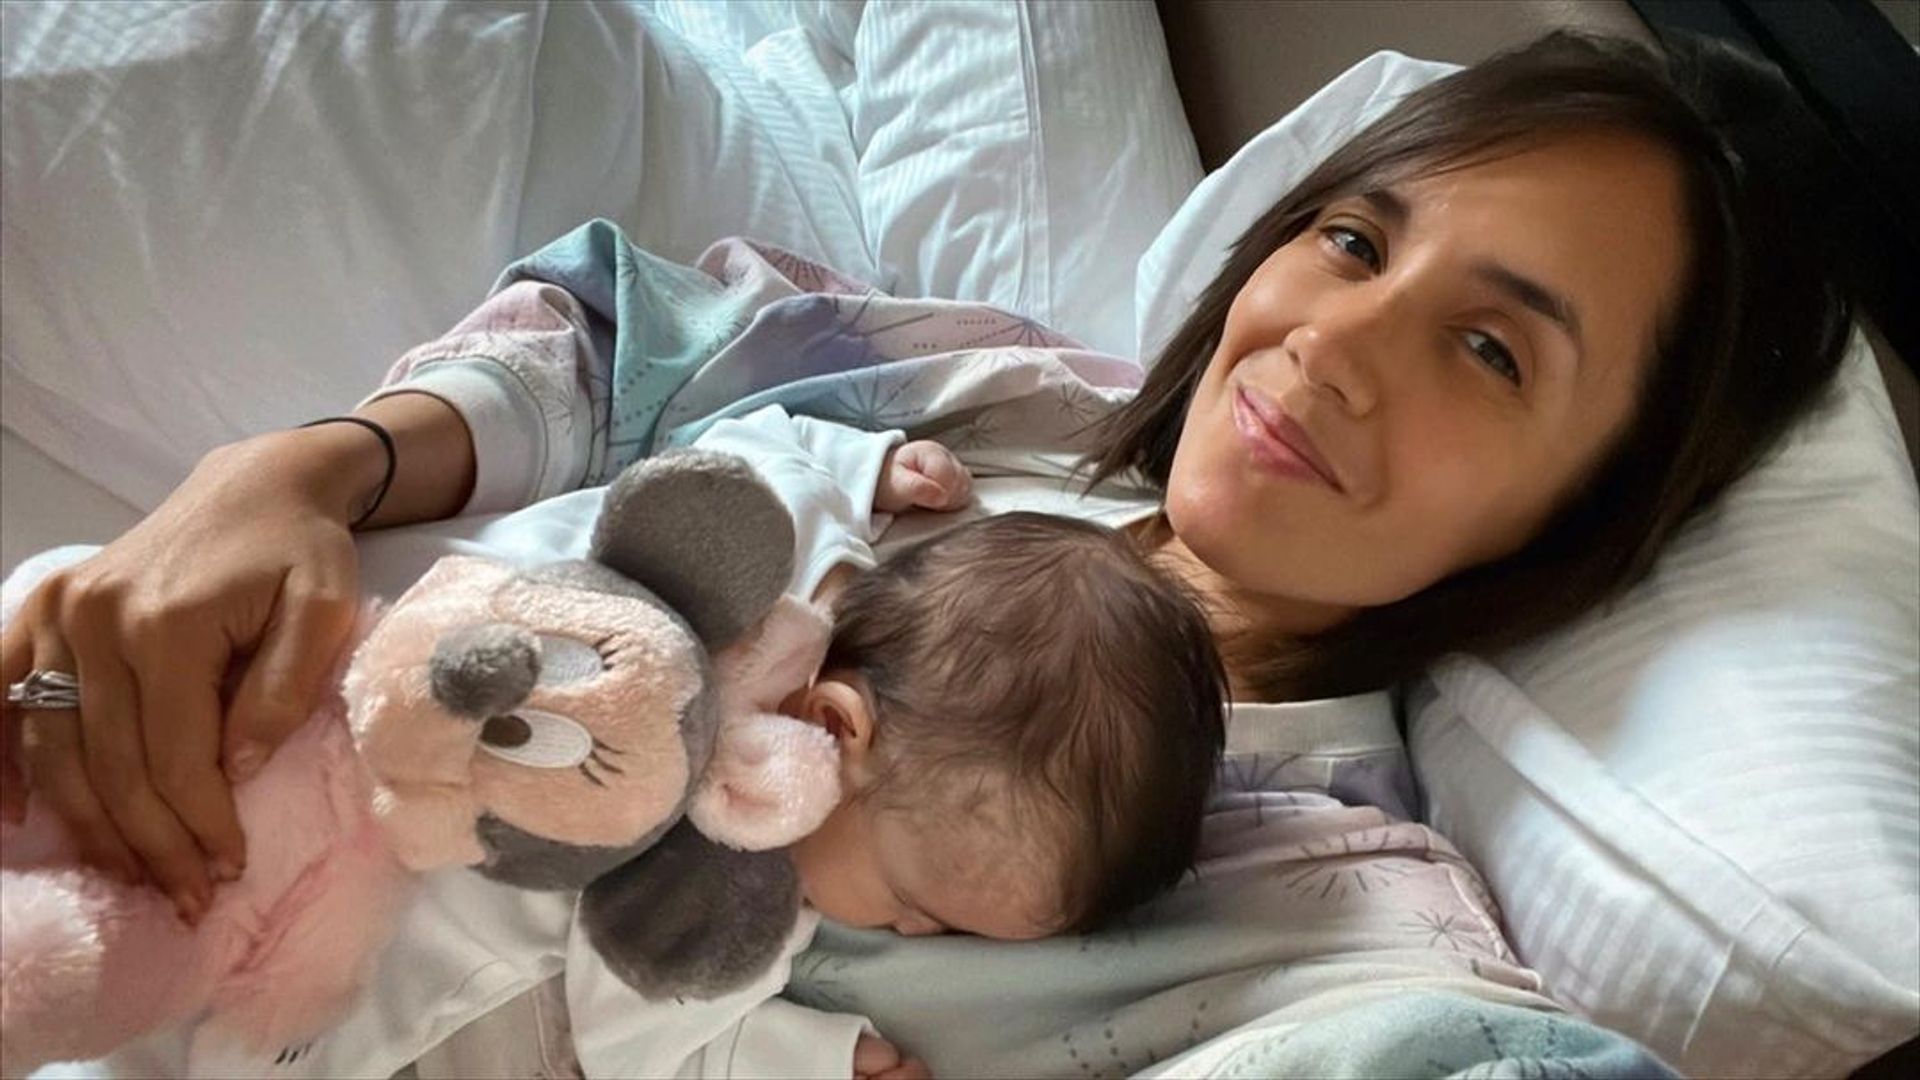 Janette Manrara sparks reaction with heart-melting photo of baby daughter Lyra